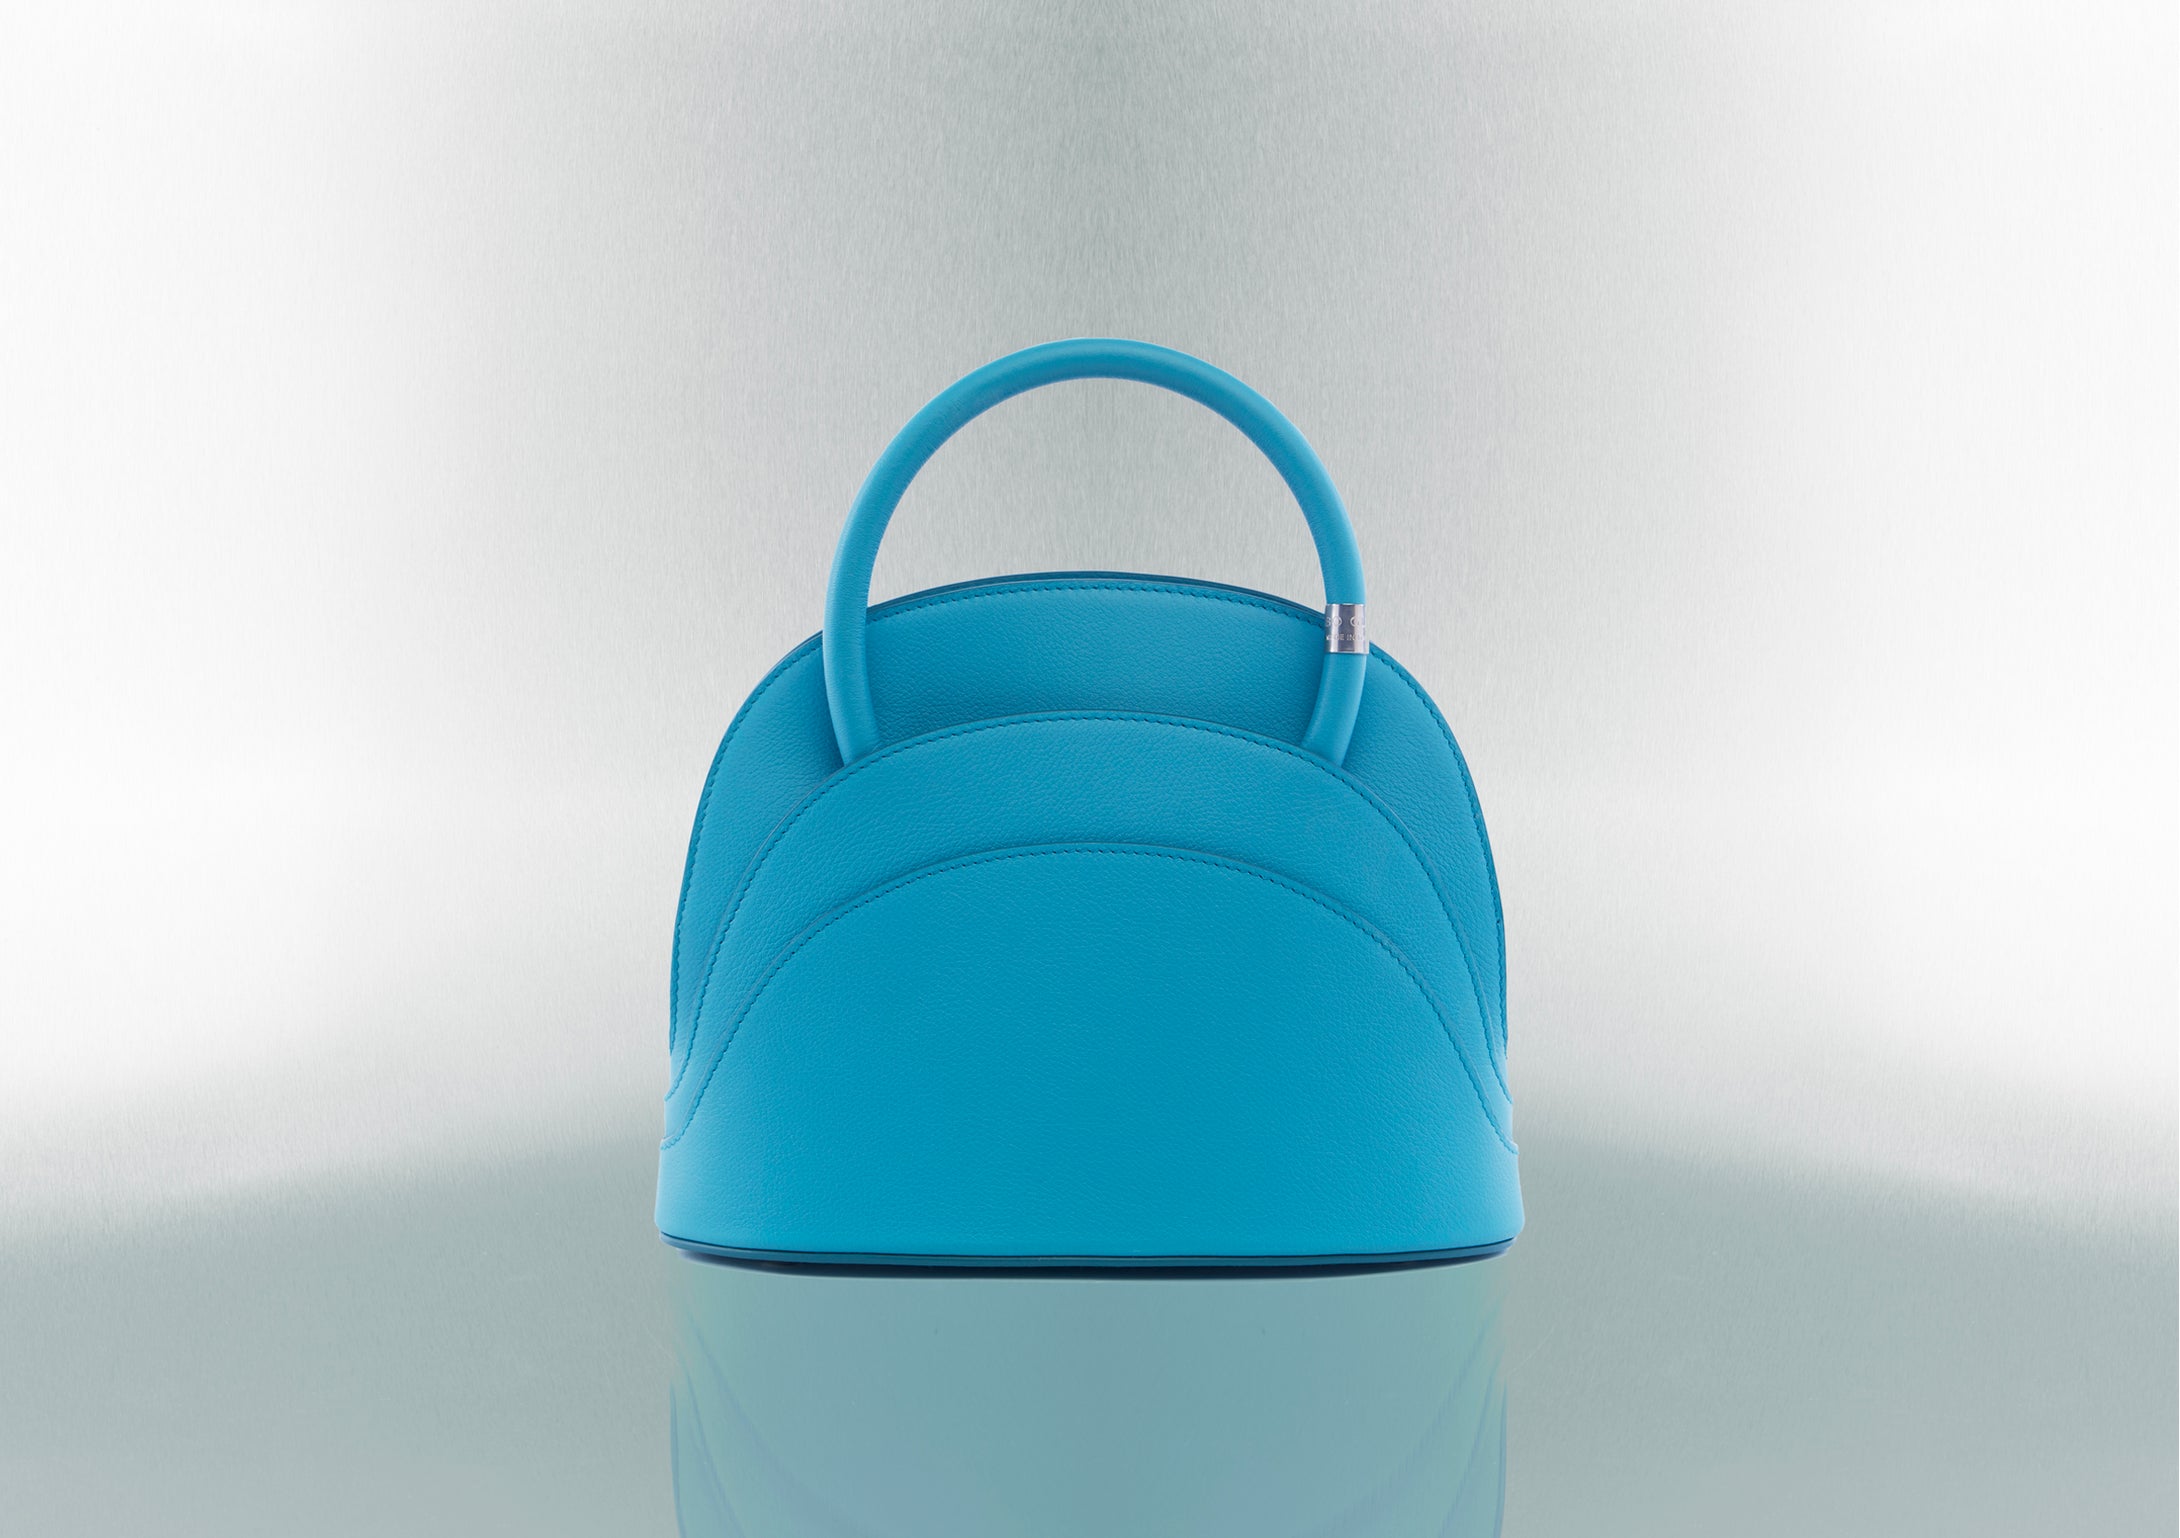 Gabo Guzzo Millefoglie M mini handbag in Tropea blue calfskin and palladium plated hardware. One-of-a-kind creation embellished with fine jewellery and handcrafted in Italy.